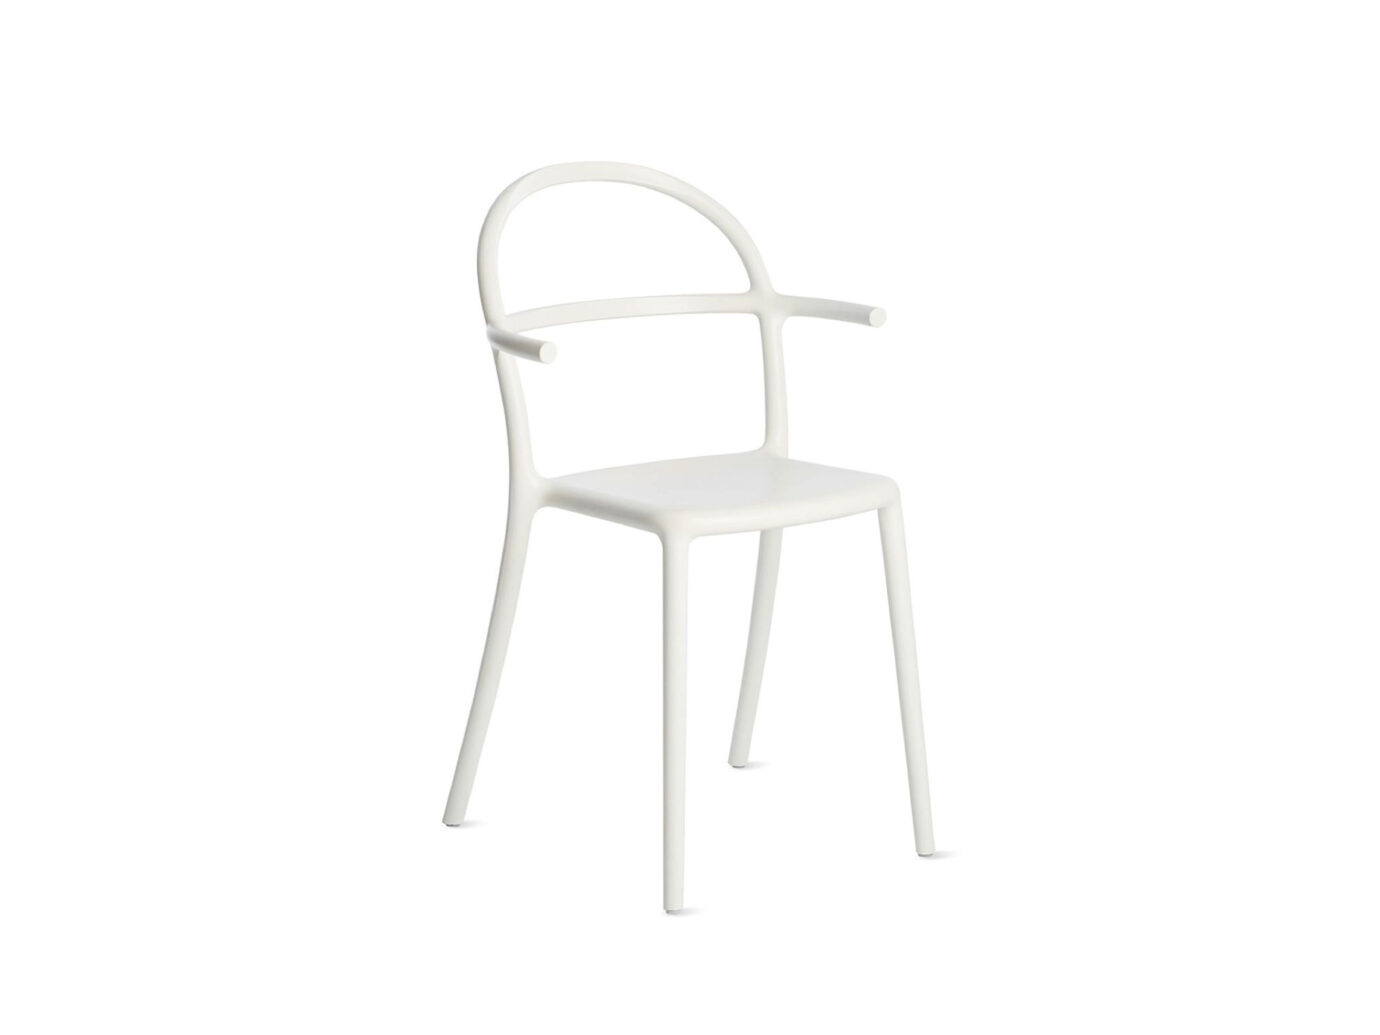 Generic C Chair Designed by Philippe Starck for Kartell